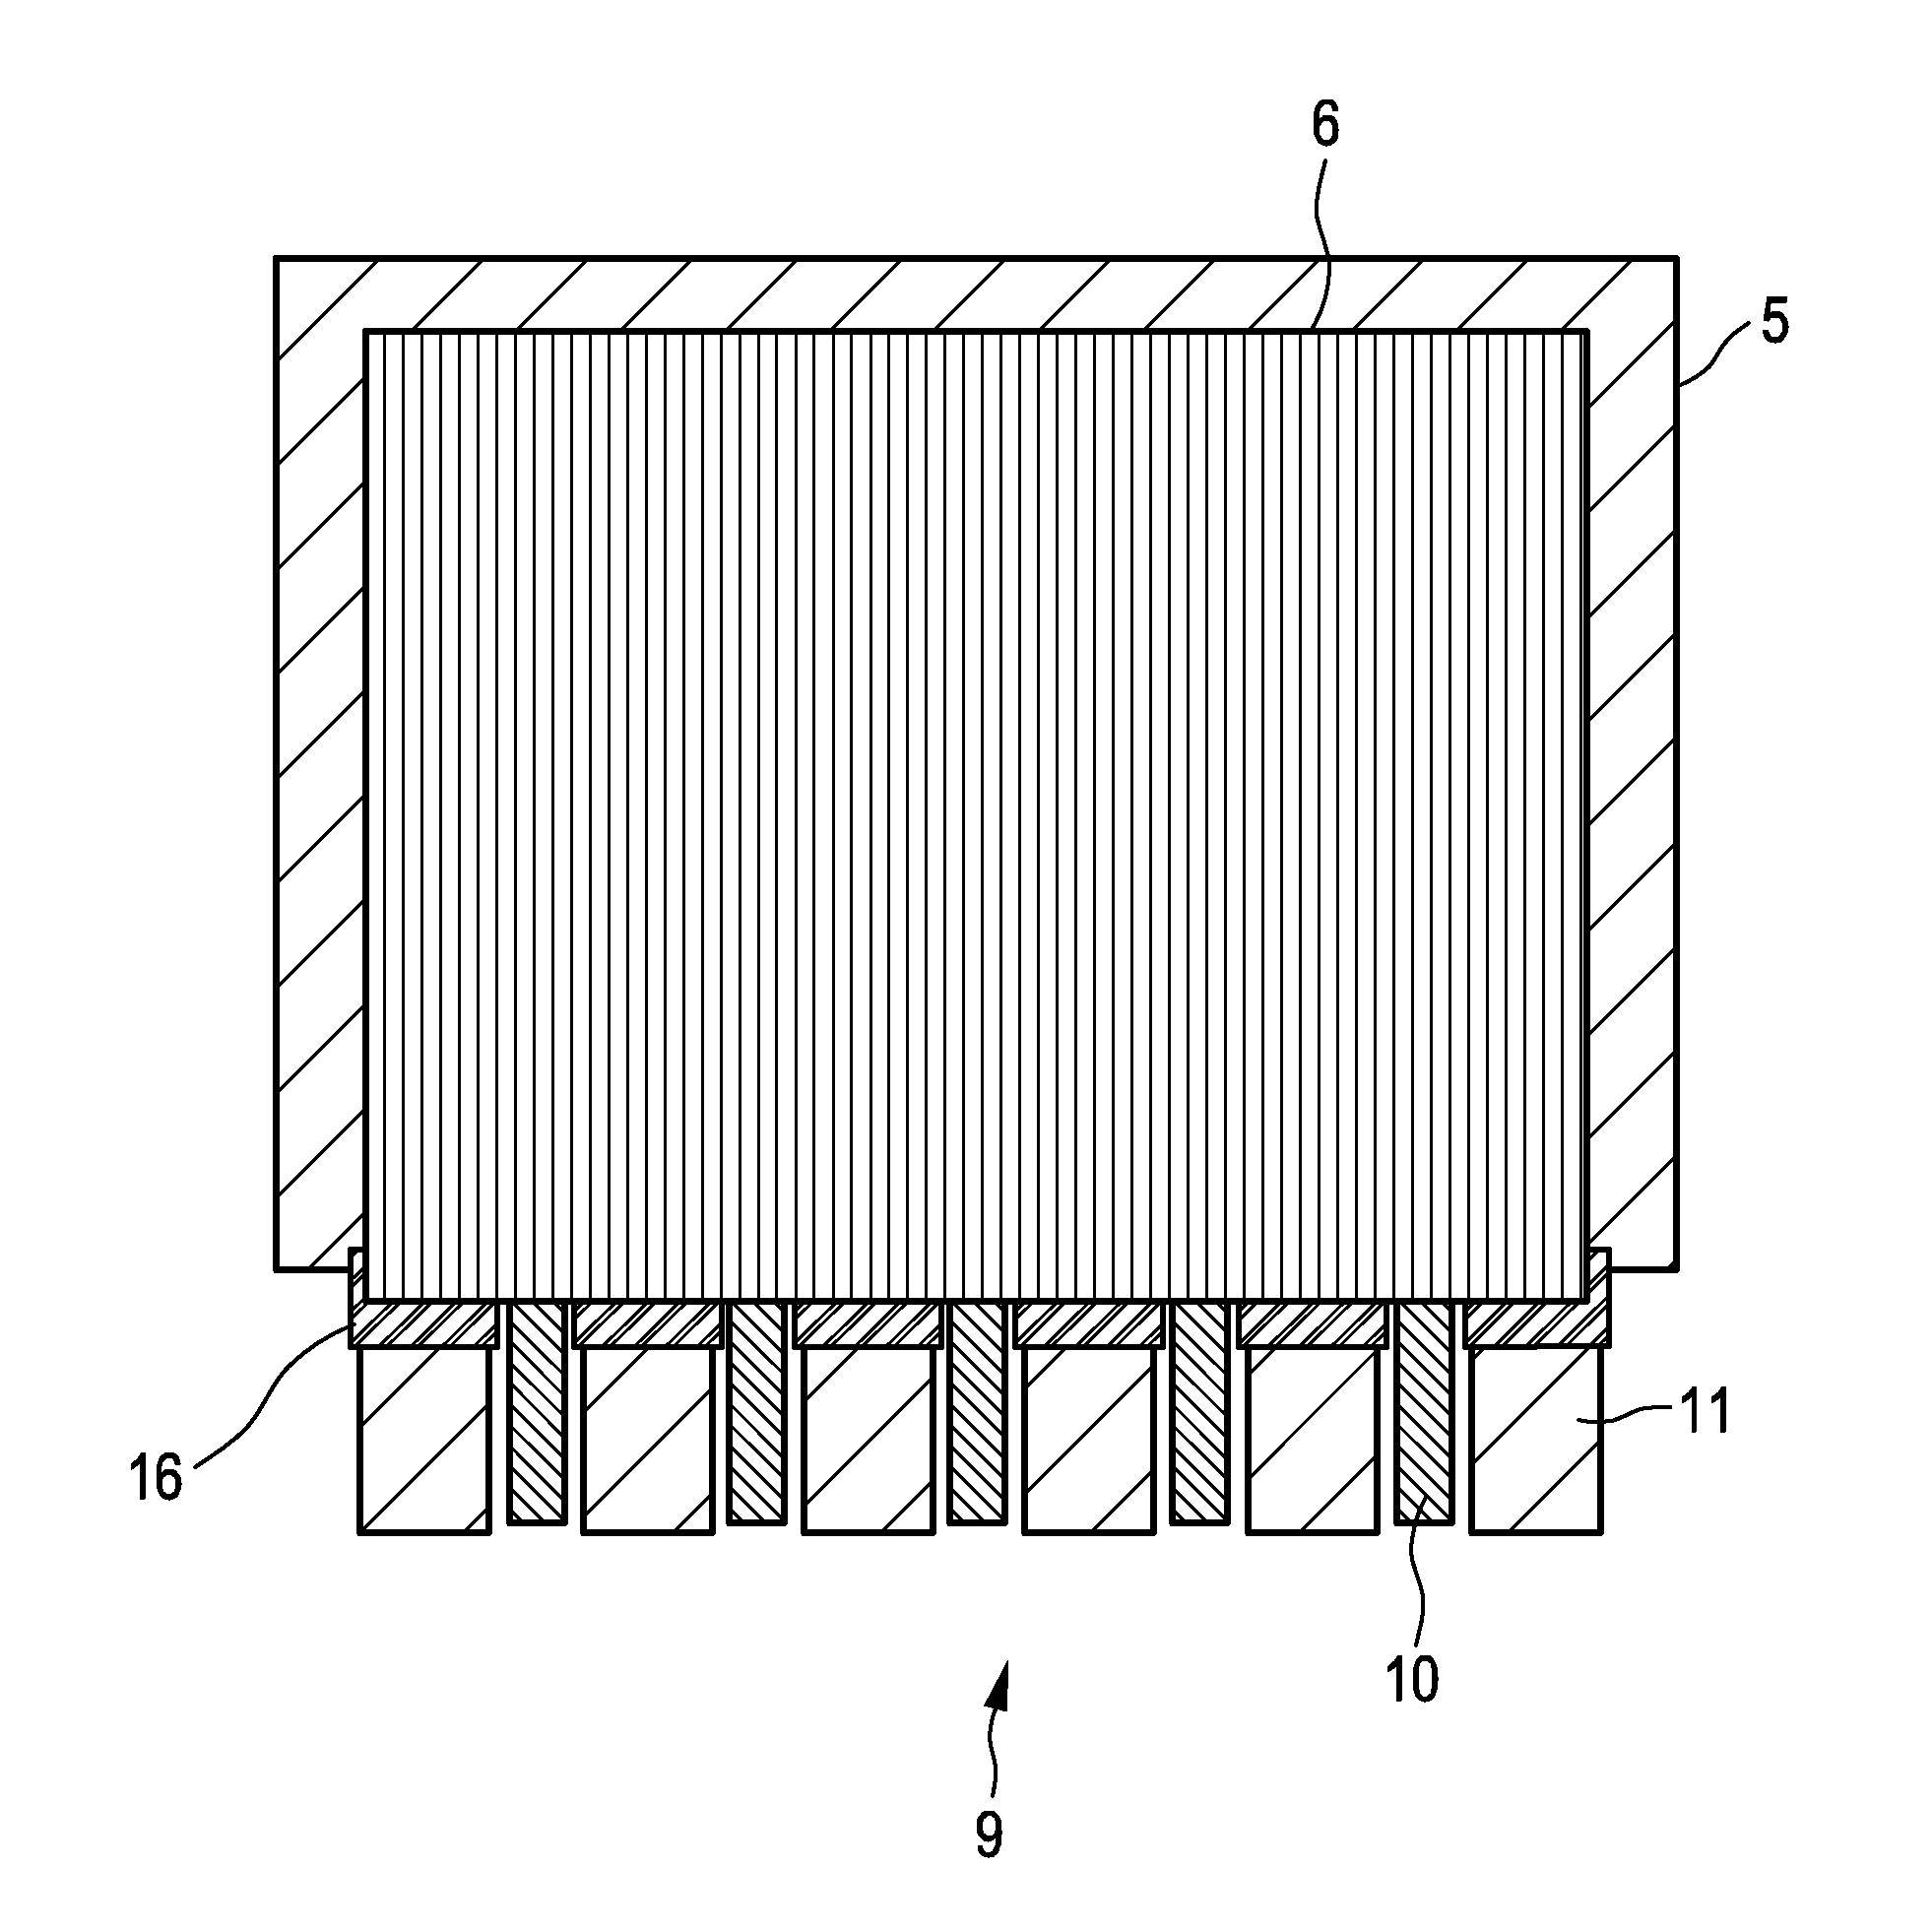 Light-emitting device with alternating arrangement of anode pads and cathode pads